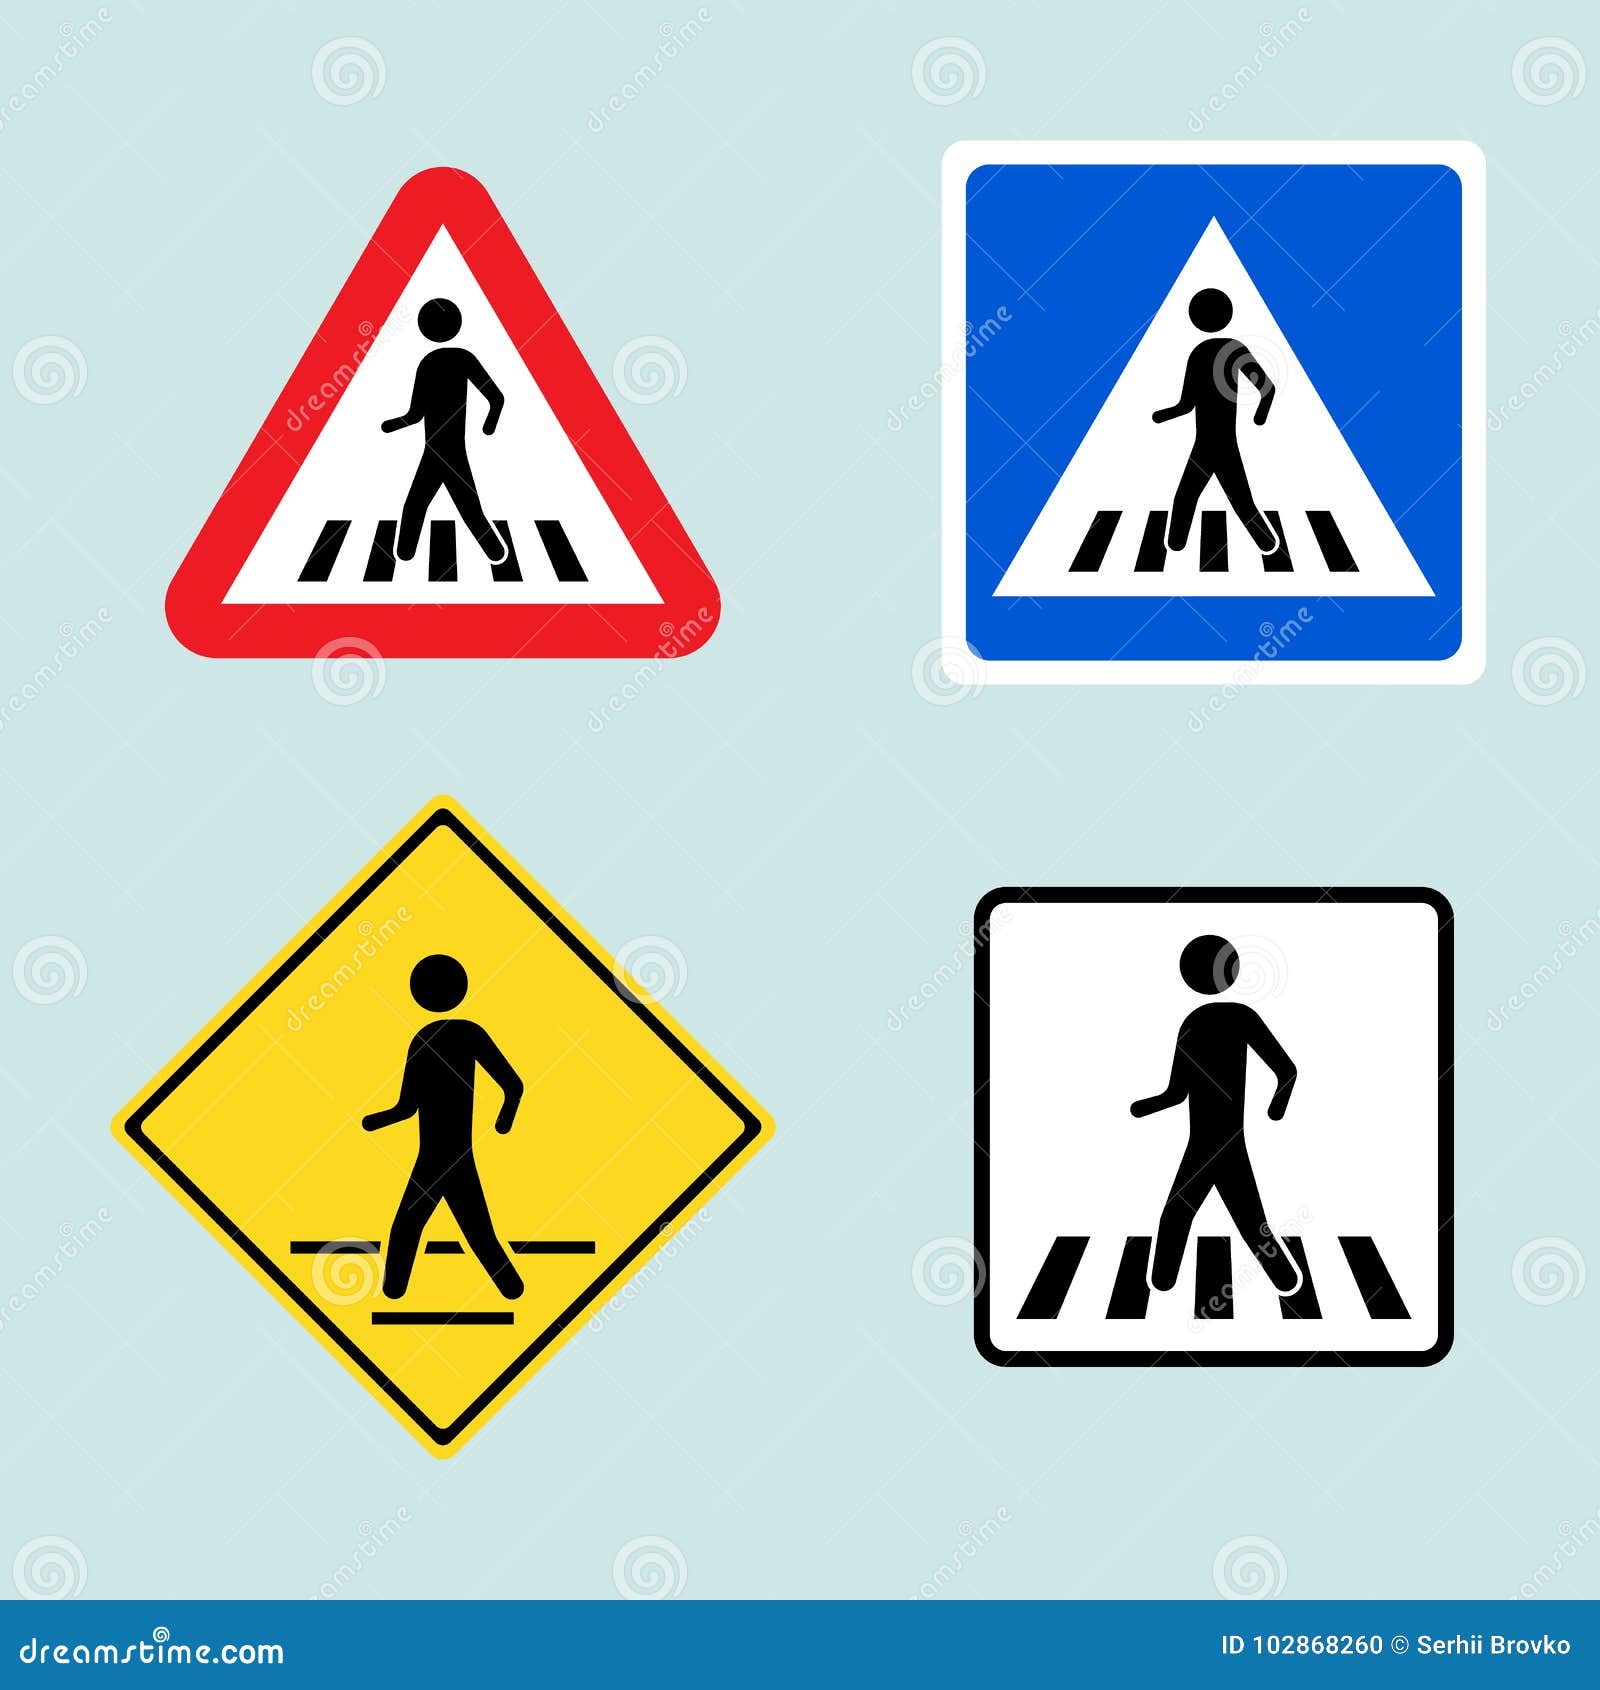 set of pedestrian crossing sign  on background.  .